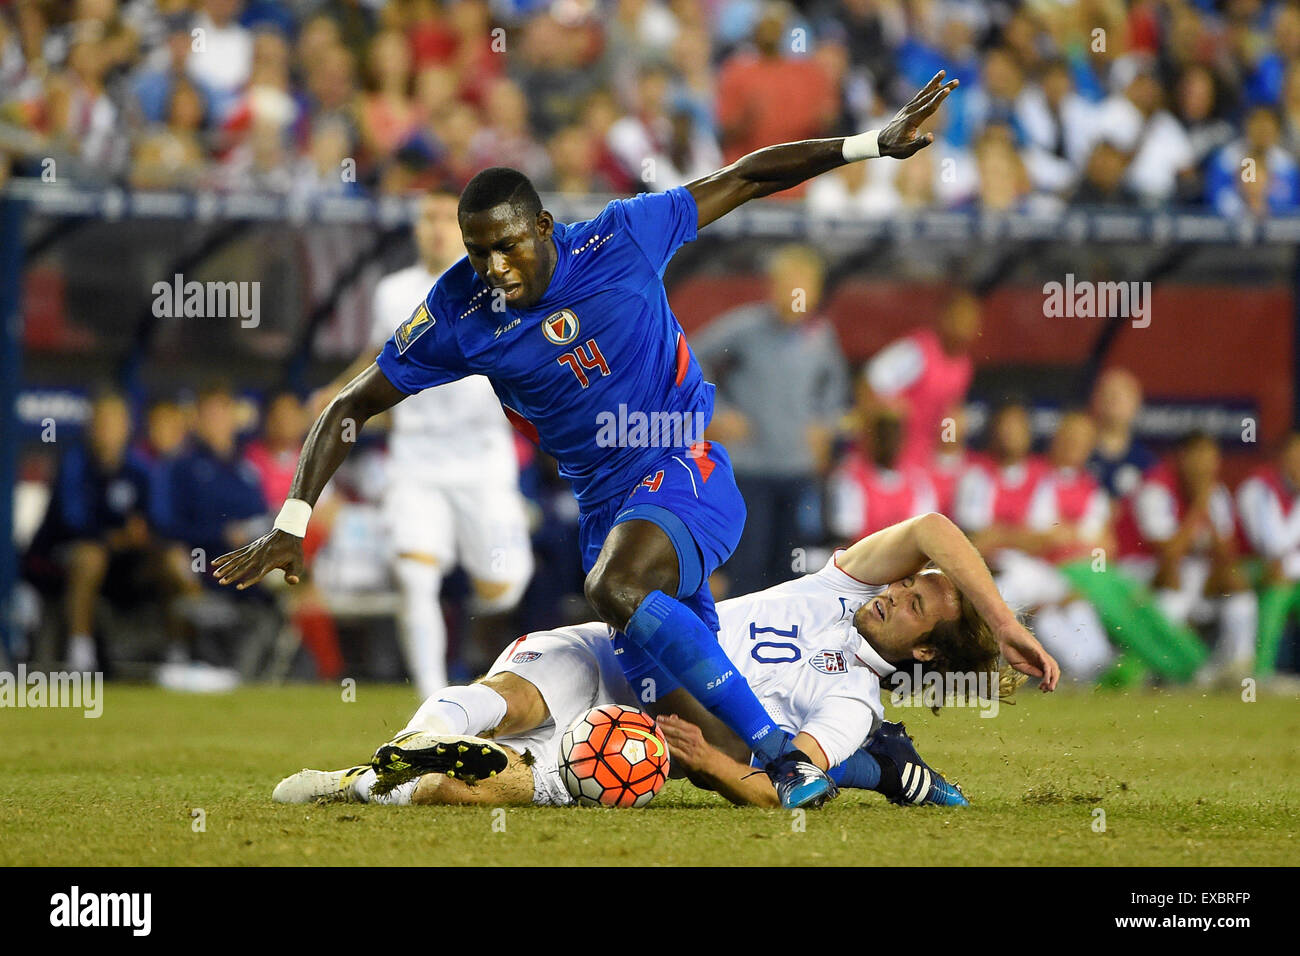 Foxborough, Massachusetts, USA. 10th July, 2015. - United States midfielder Mix Diskerud (10) collides with Haiti midfielder James Marcelin (14) on the pitch during the CONCACAF Gold Cup group stage match between USA and Haiti held at Gillette Stadium, in Foxborough Massachusetts. USA defeated Haiti 1-0. Eric Canha/CSM.*Corrects an earlier version where midfielder James Marcelin (14) is mis-identified/ Alamy Live News Stock Photo